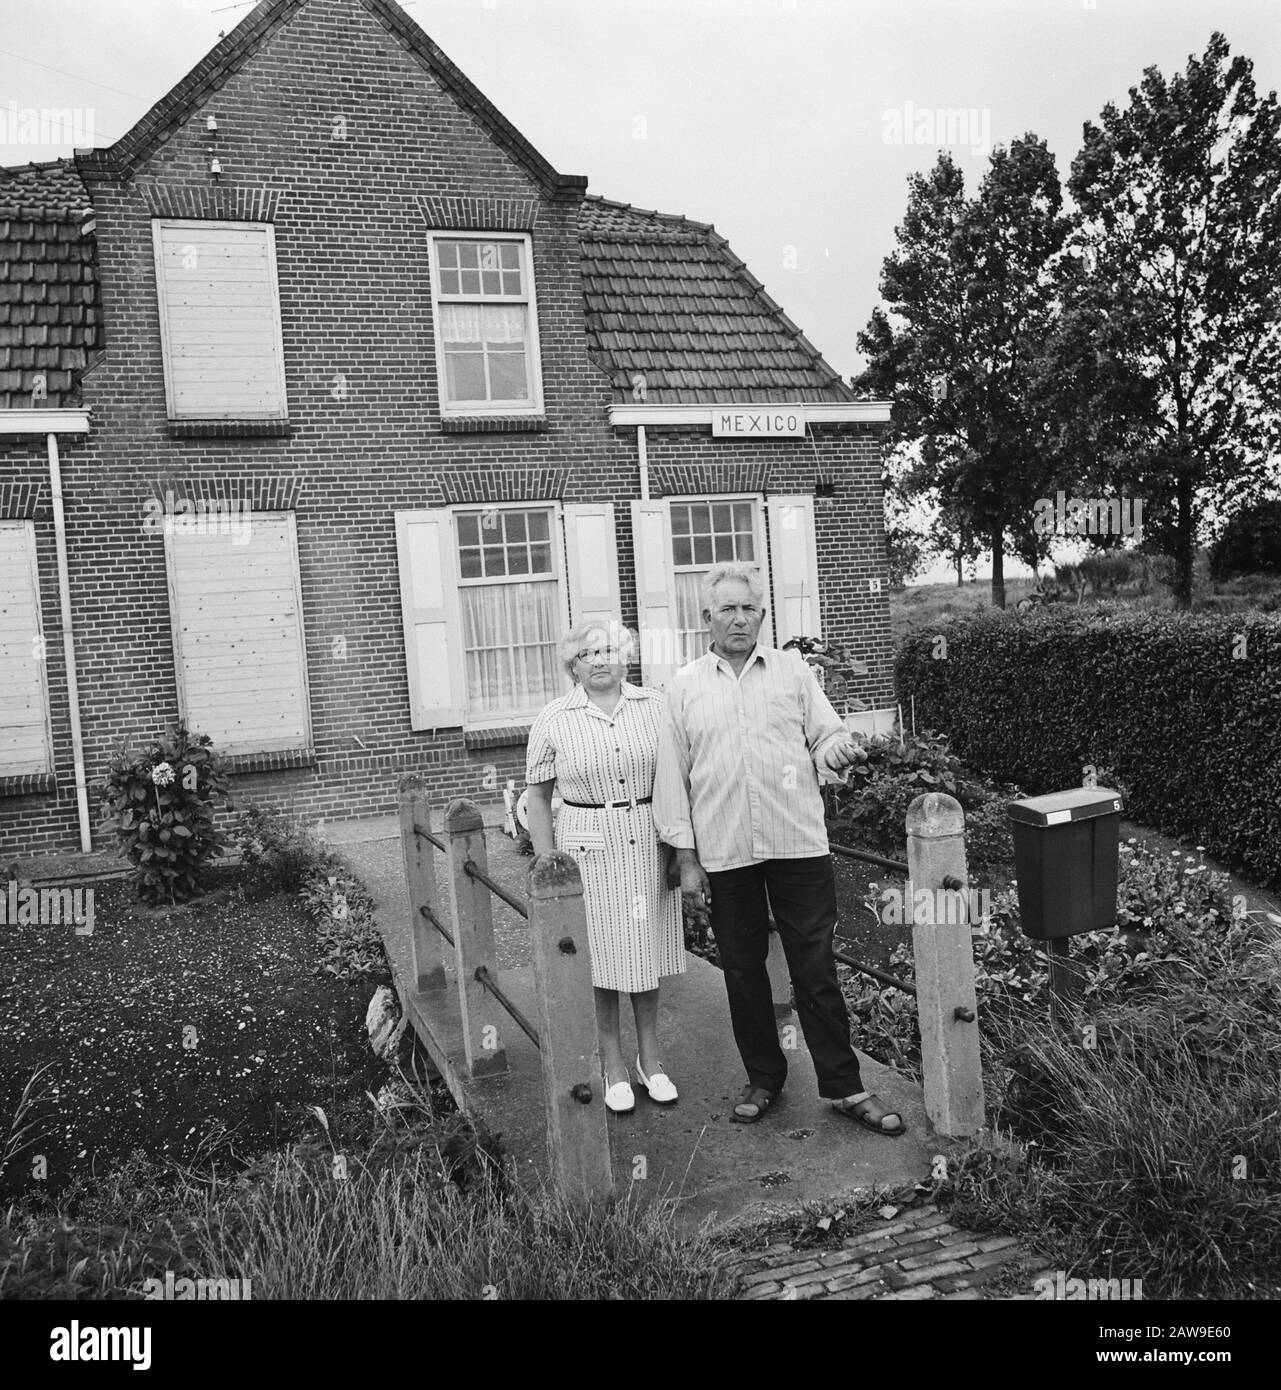 Mission Reformed Netherlands in Ruygoord Date: July 25, 1973 Location: Amsterdam, Noord-Holland, Ruigoord Keywords: villages Stock Photo